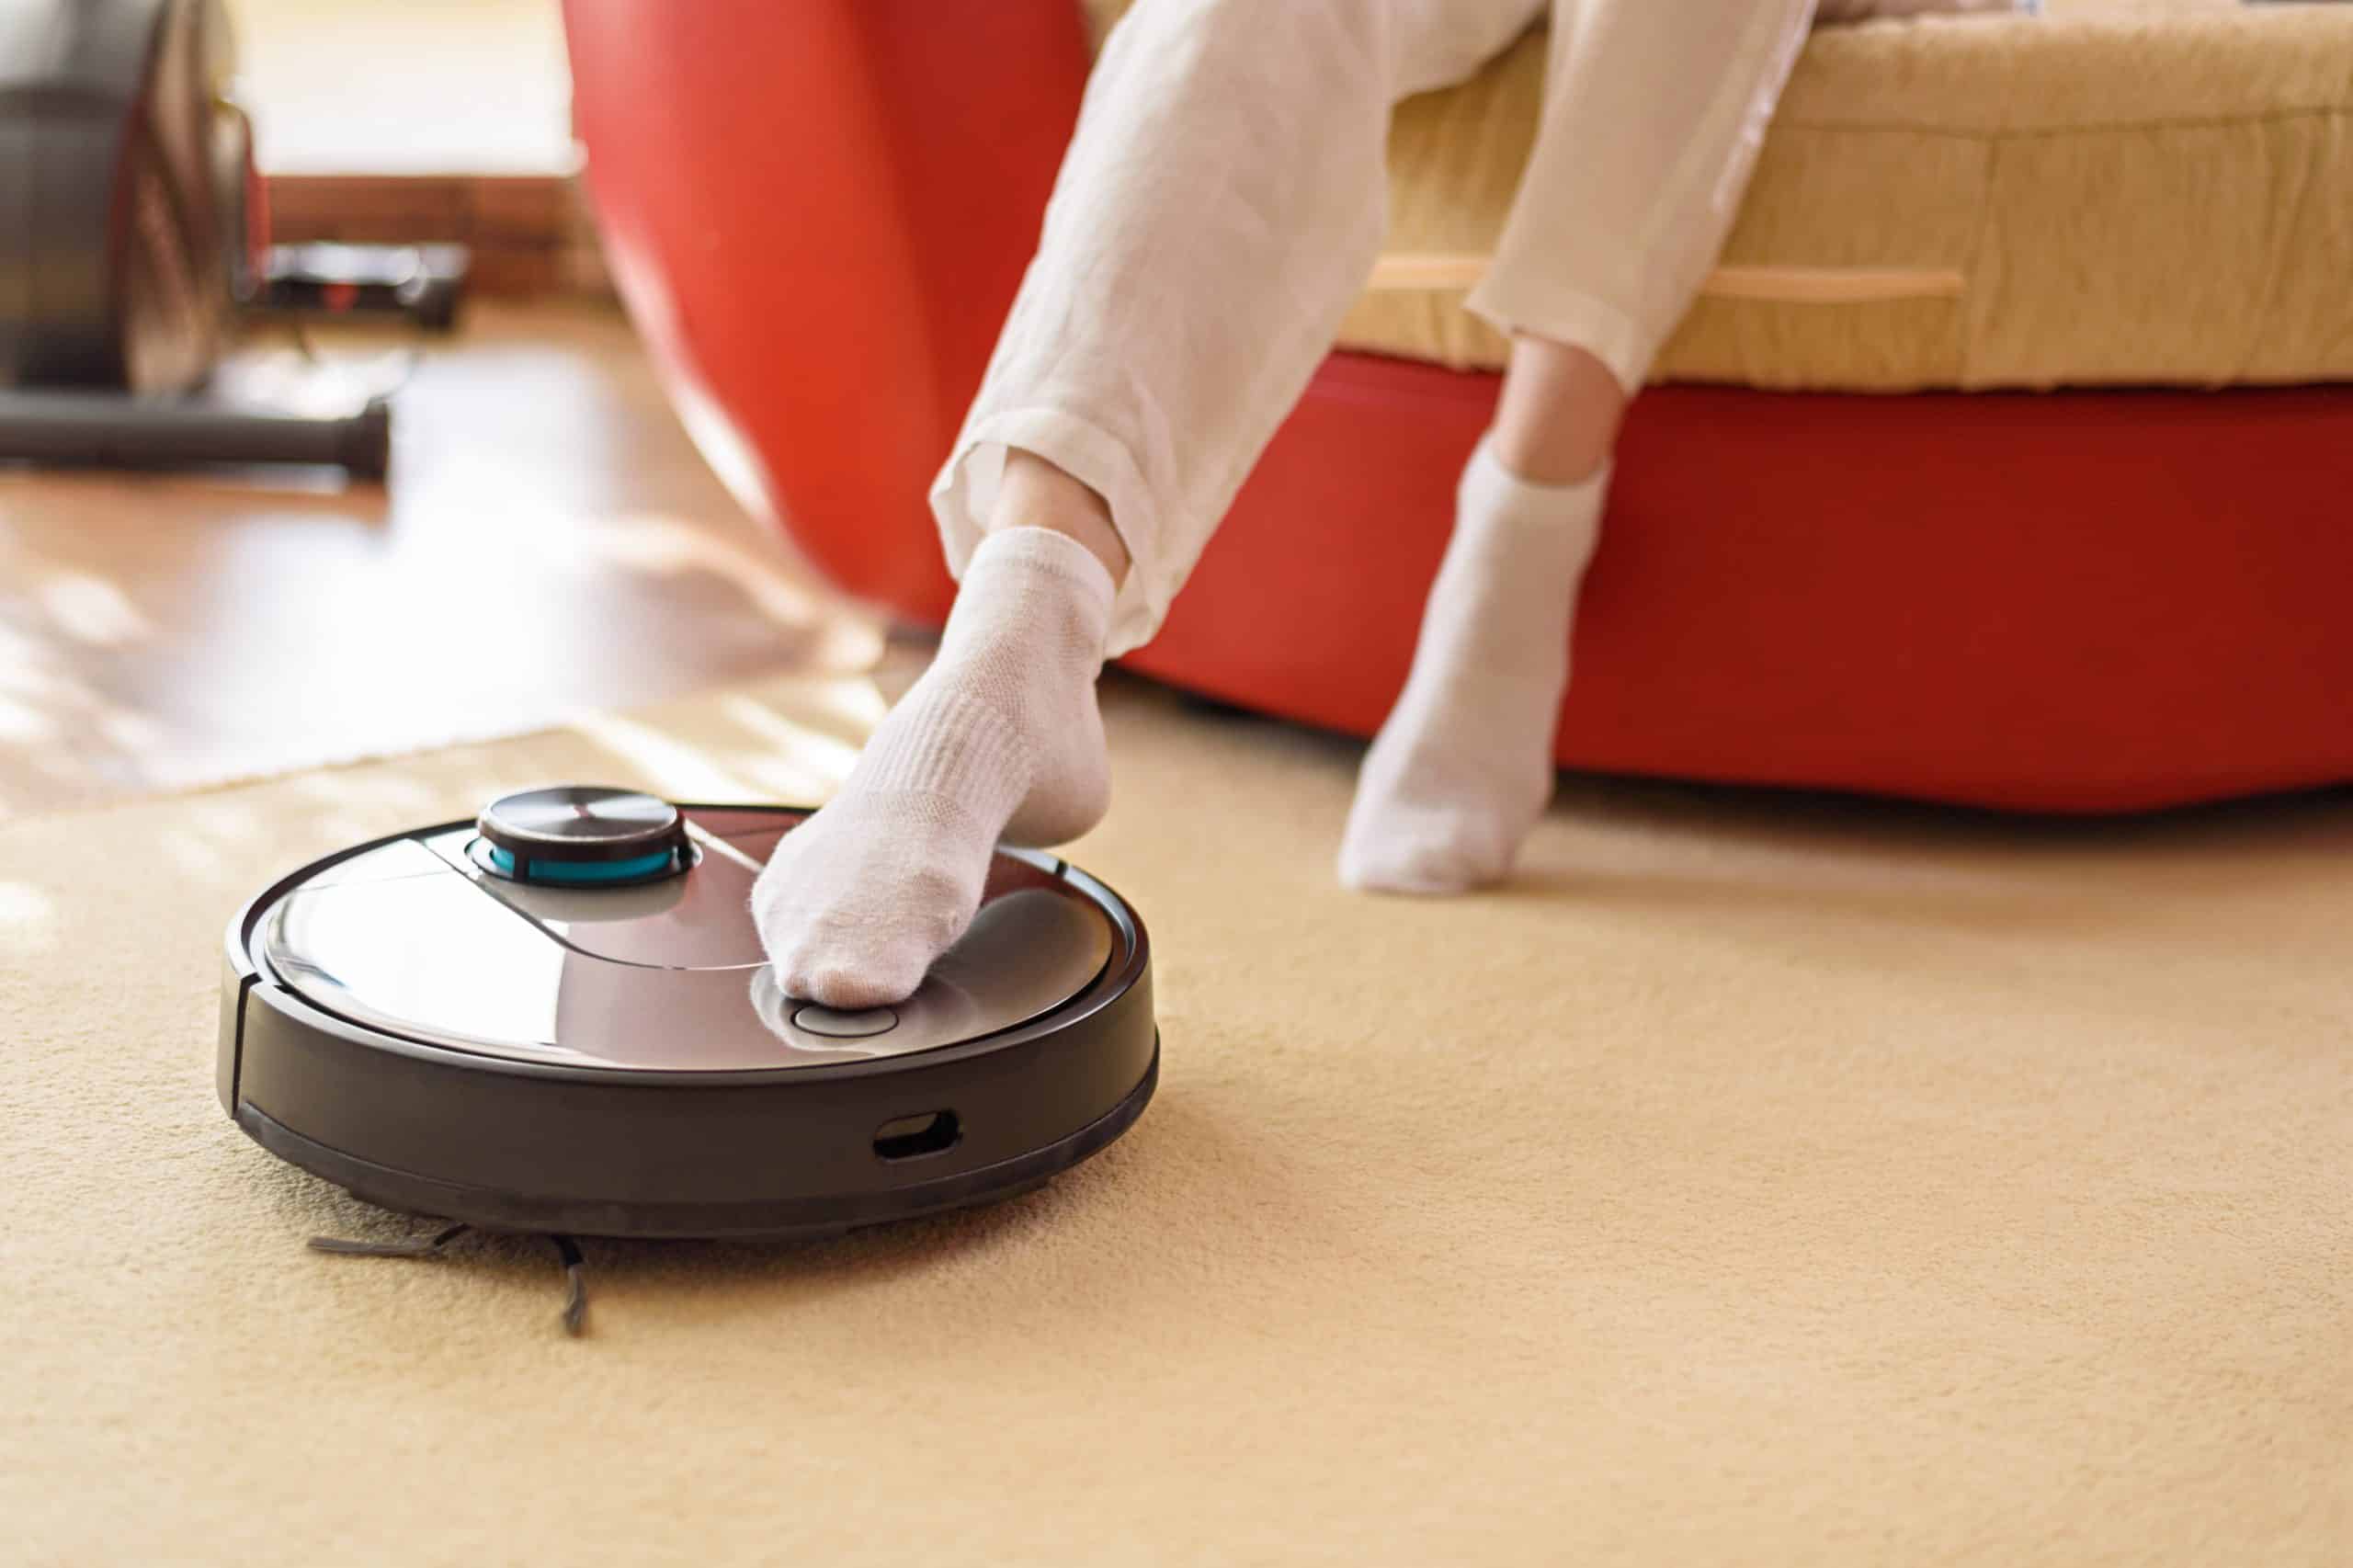 a roomba can be a useful gadget for people with disabilities